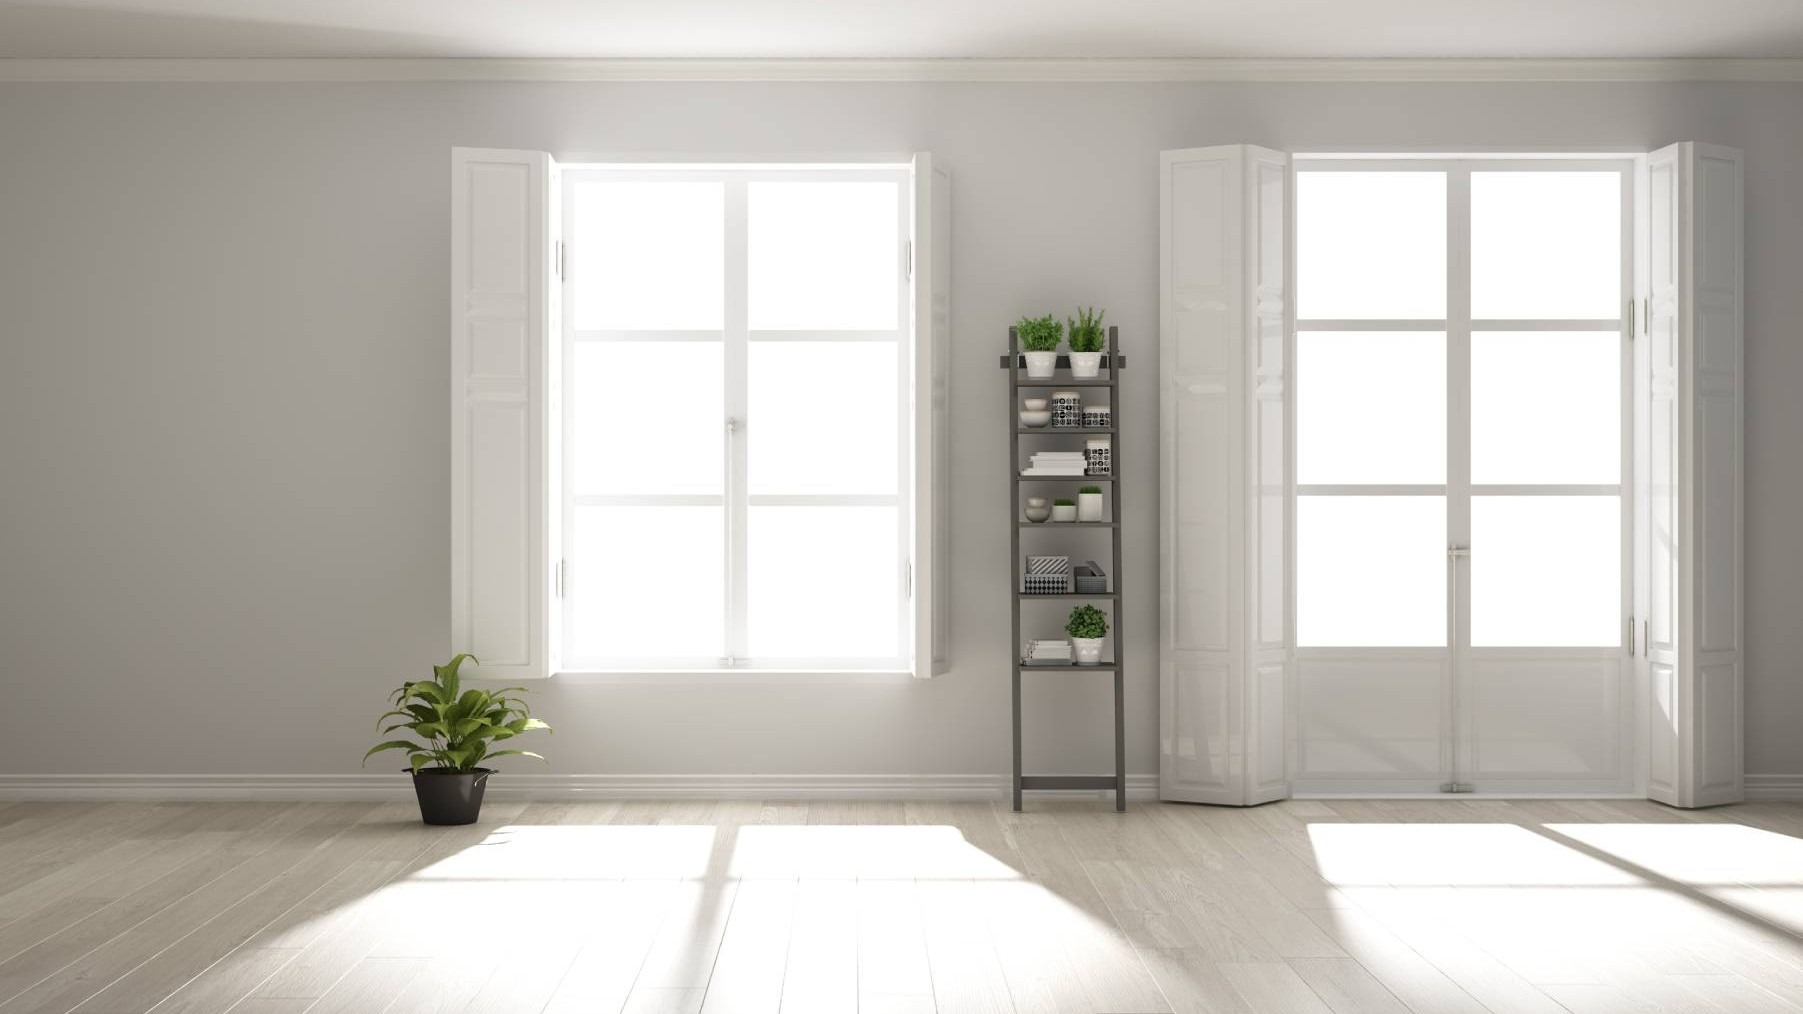 UK Premium Made-To-Measure White Window Shutters - 5 Tips To Help You Choose